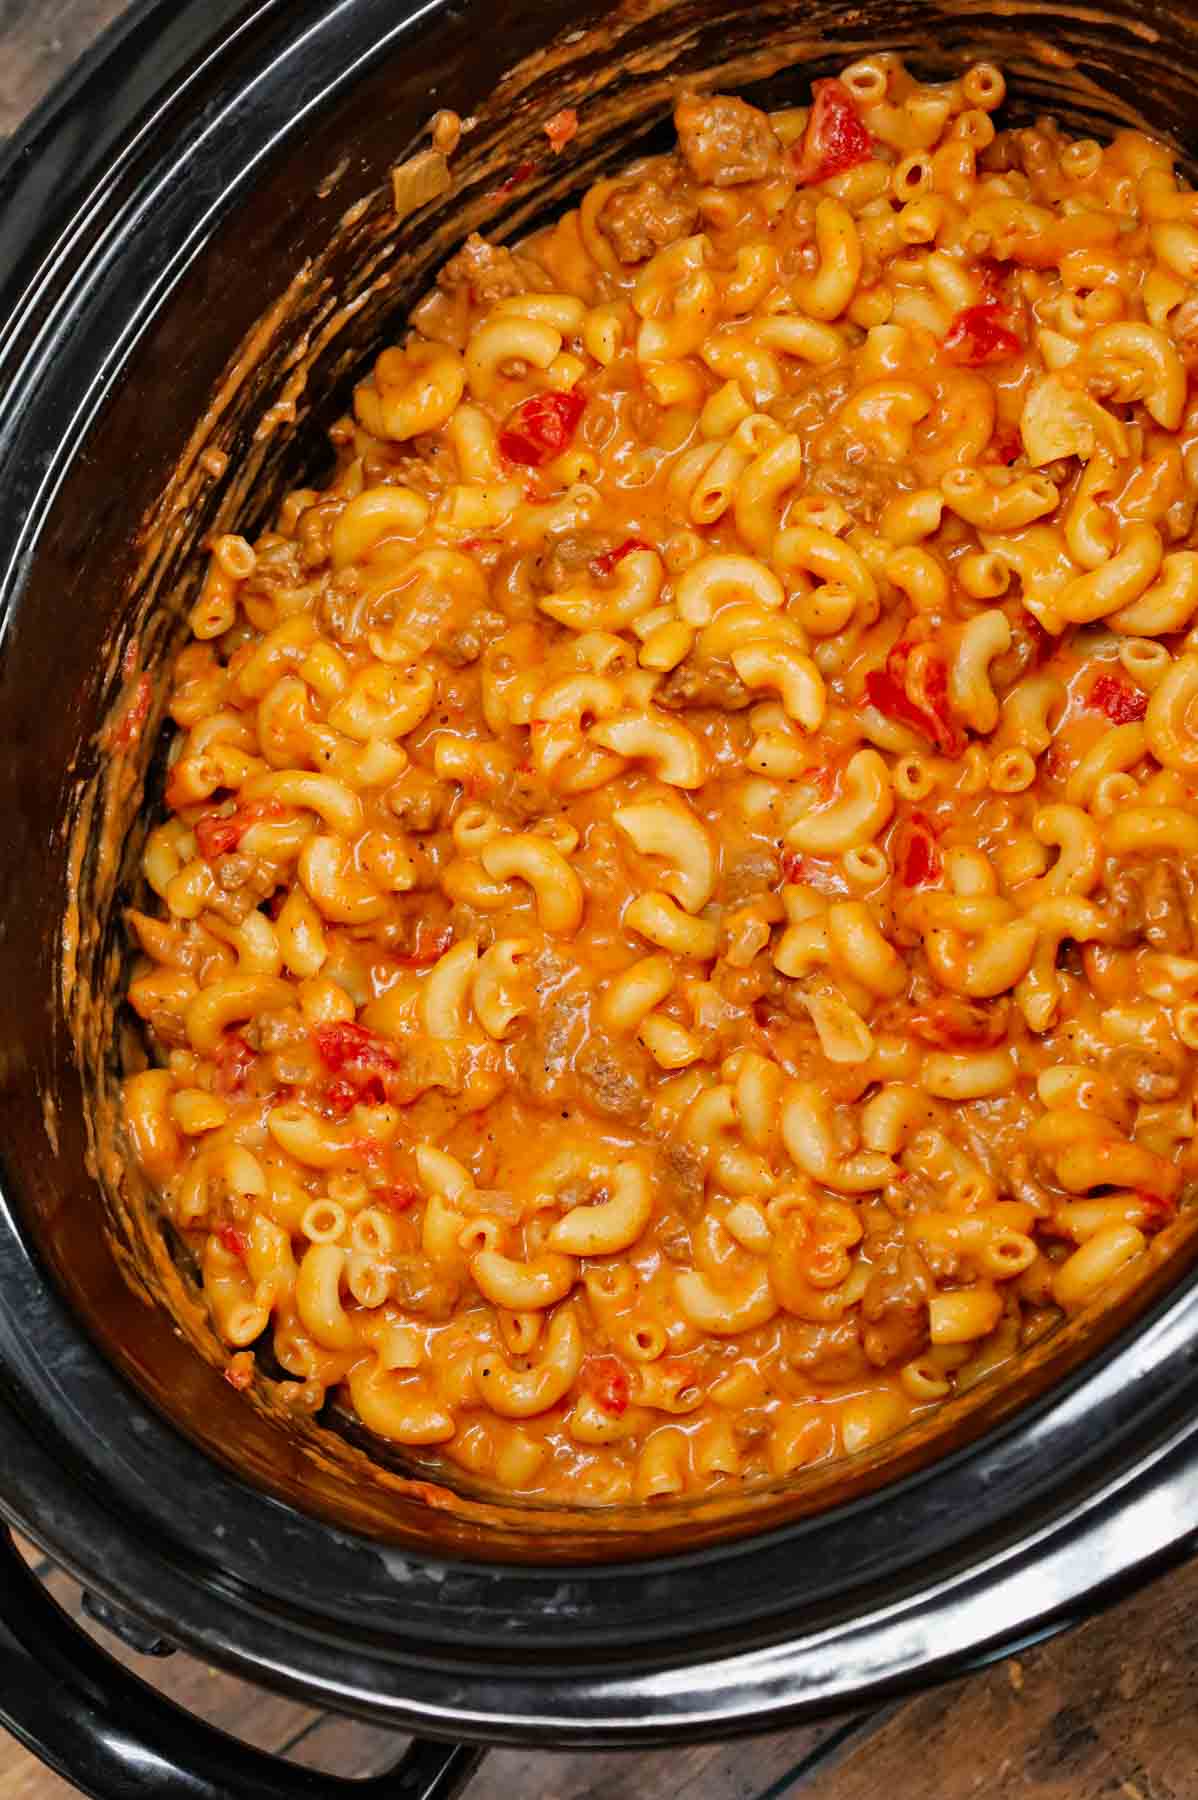 Crock Pot Hamburger Helper is a hearty slow cooker dish loaded with ground beef, diced onions, diced tomatoes, macaroni, cheddar soup and shredded cheddar cheese.